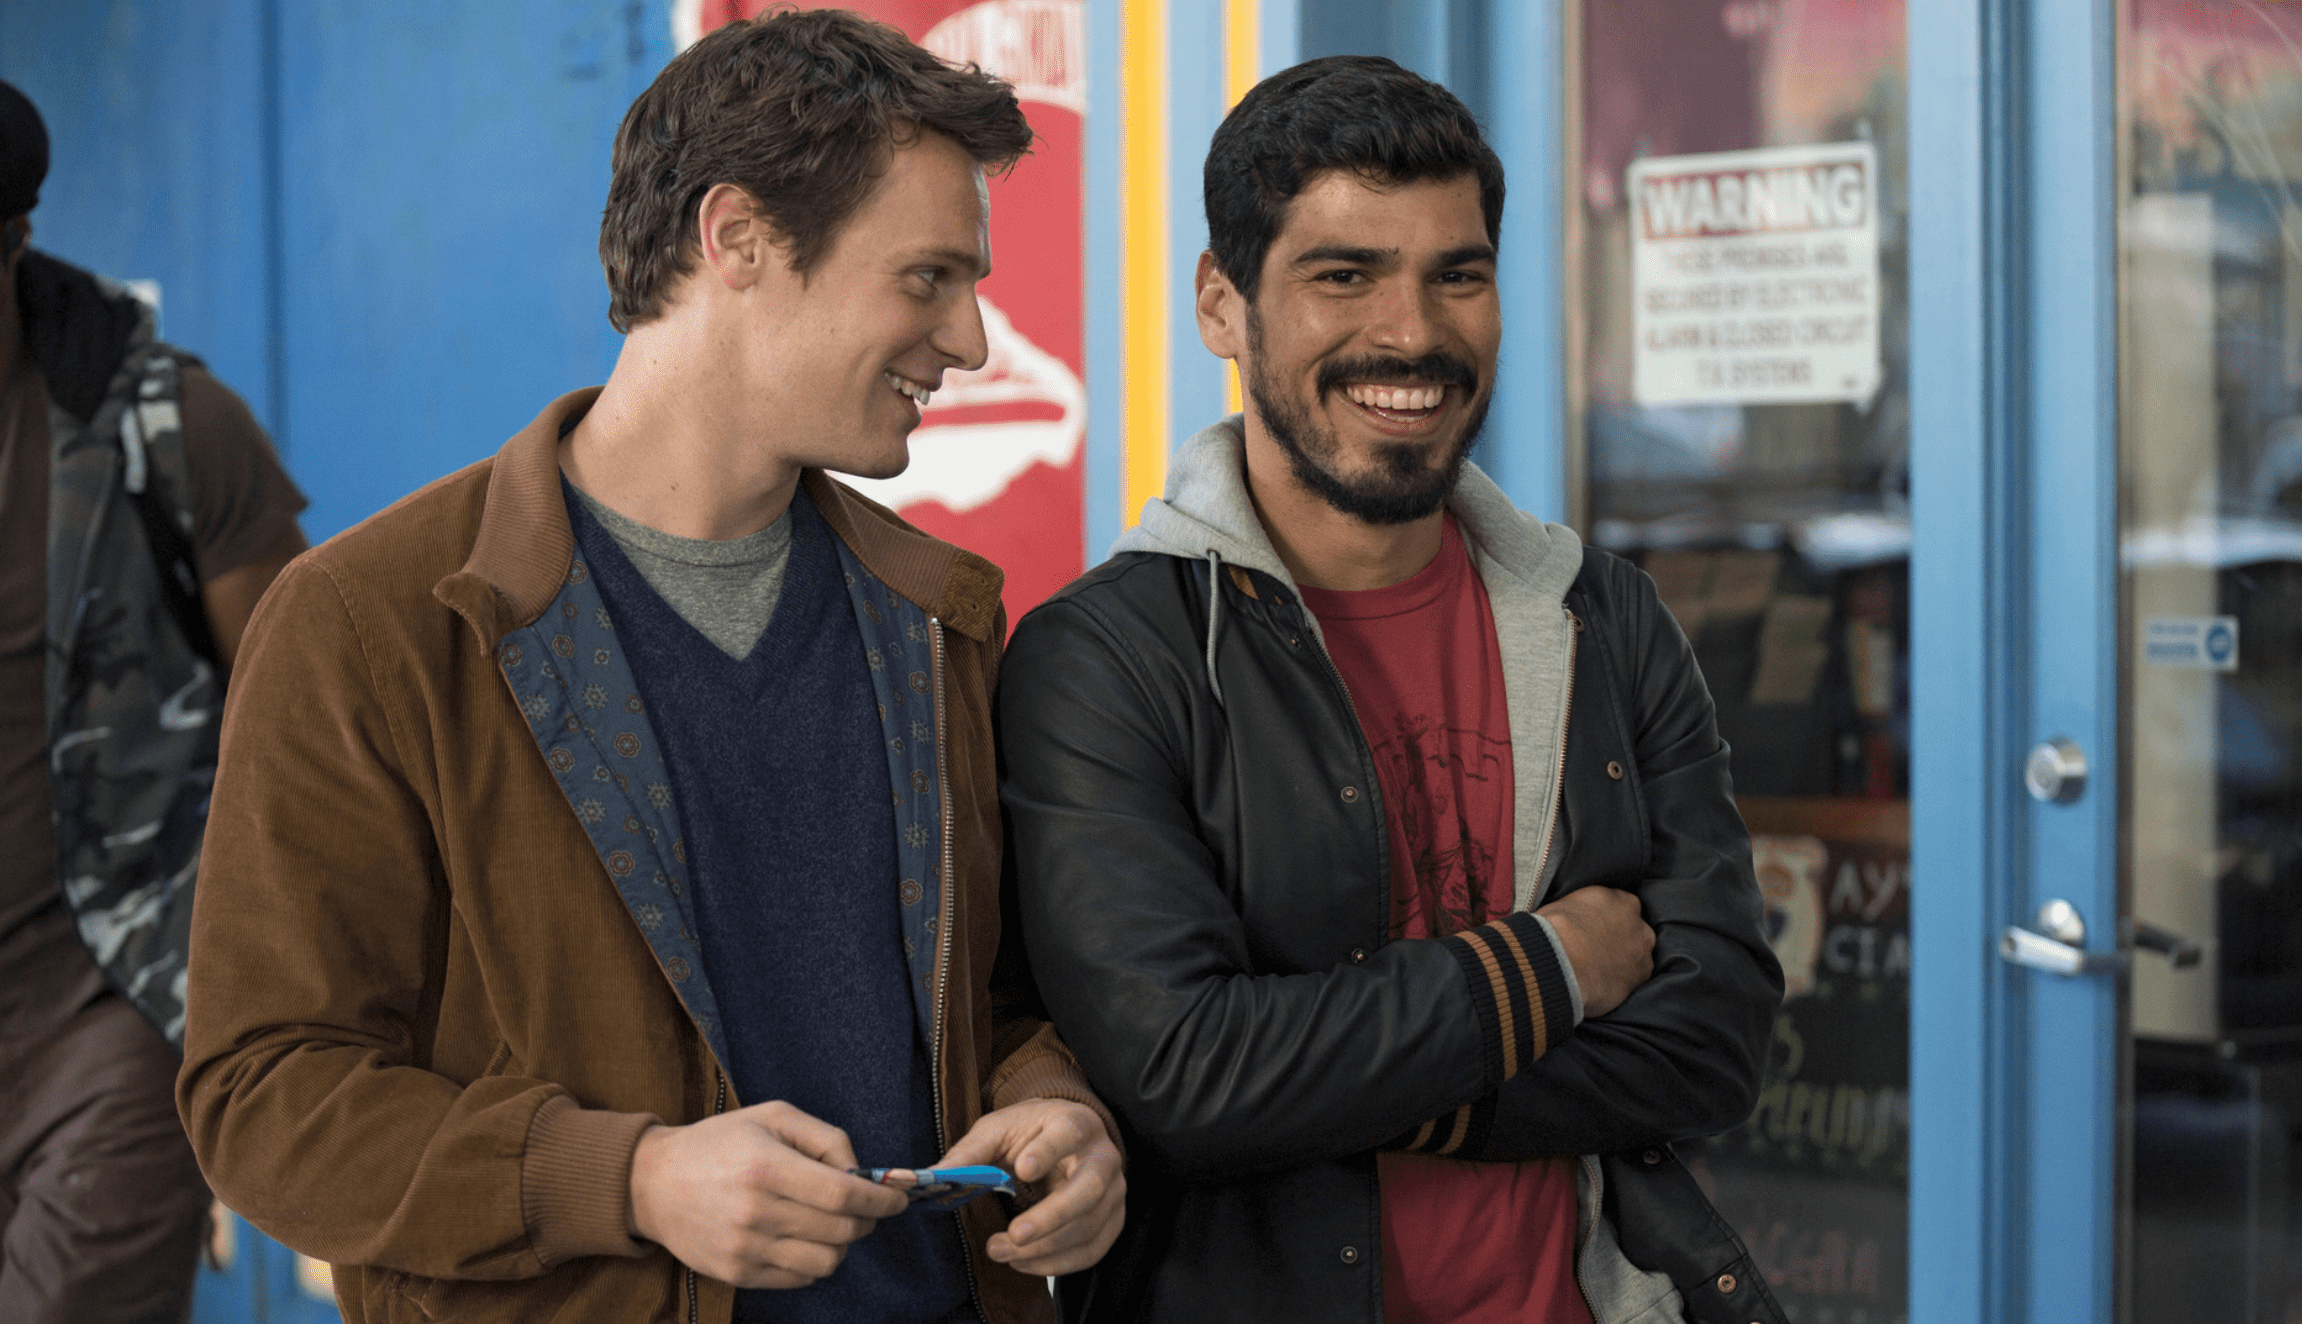 Two of the main cast of Looking walking past a blue shop in San Francisco's Castro district